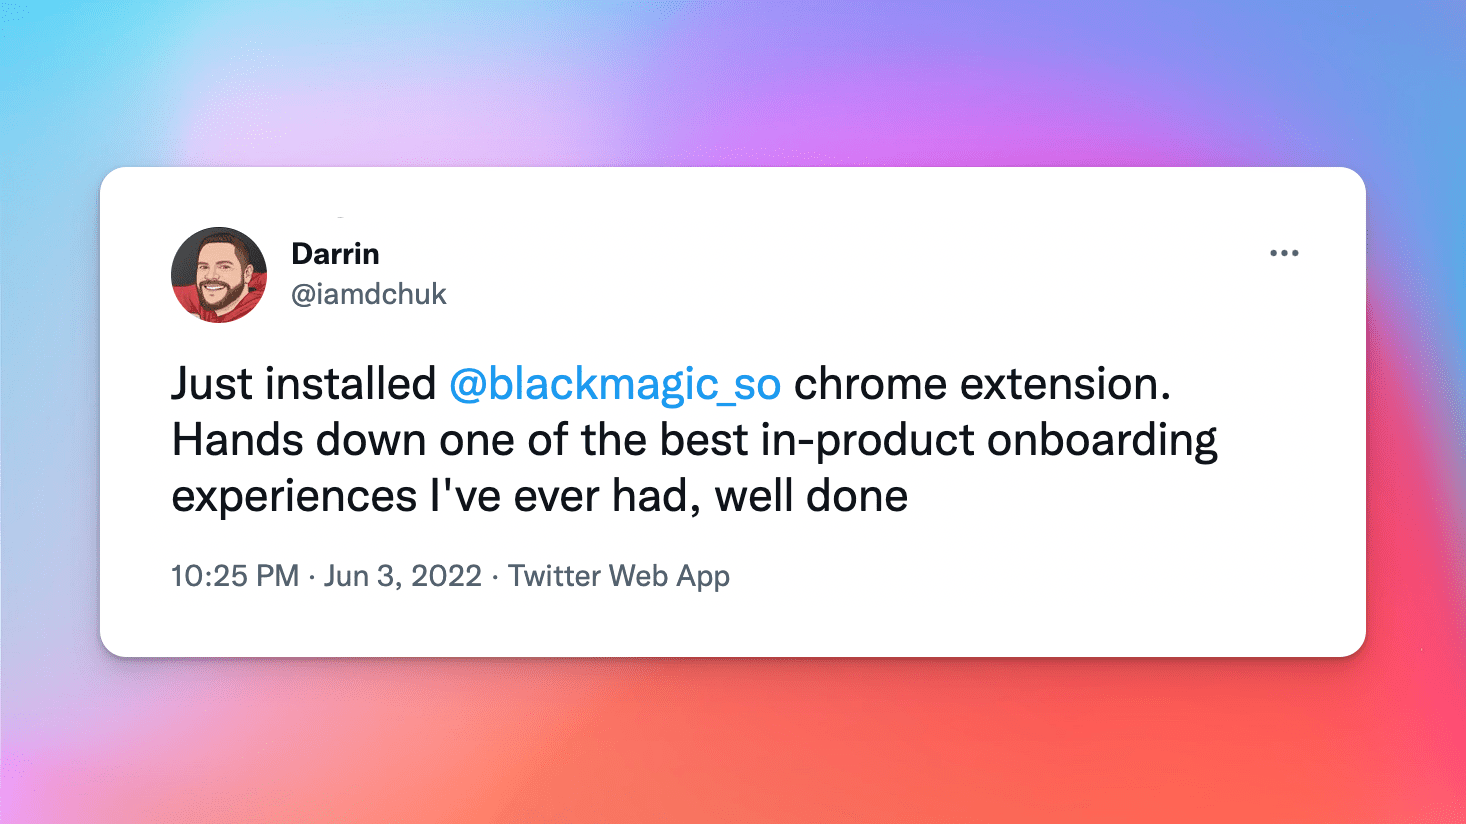 Testimonial on Twitter: Just installed Black Magic chrome extension. Hands down one of the best in-product onboarding experiences I've ever had, well done